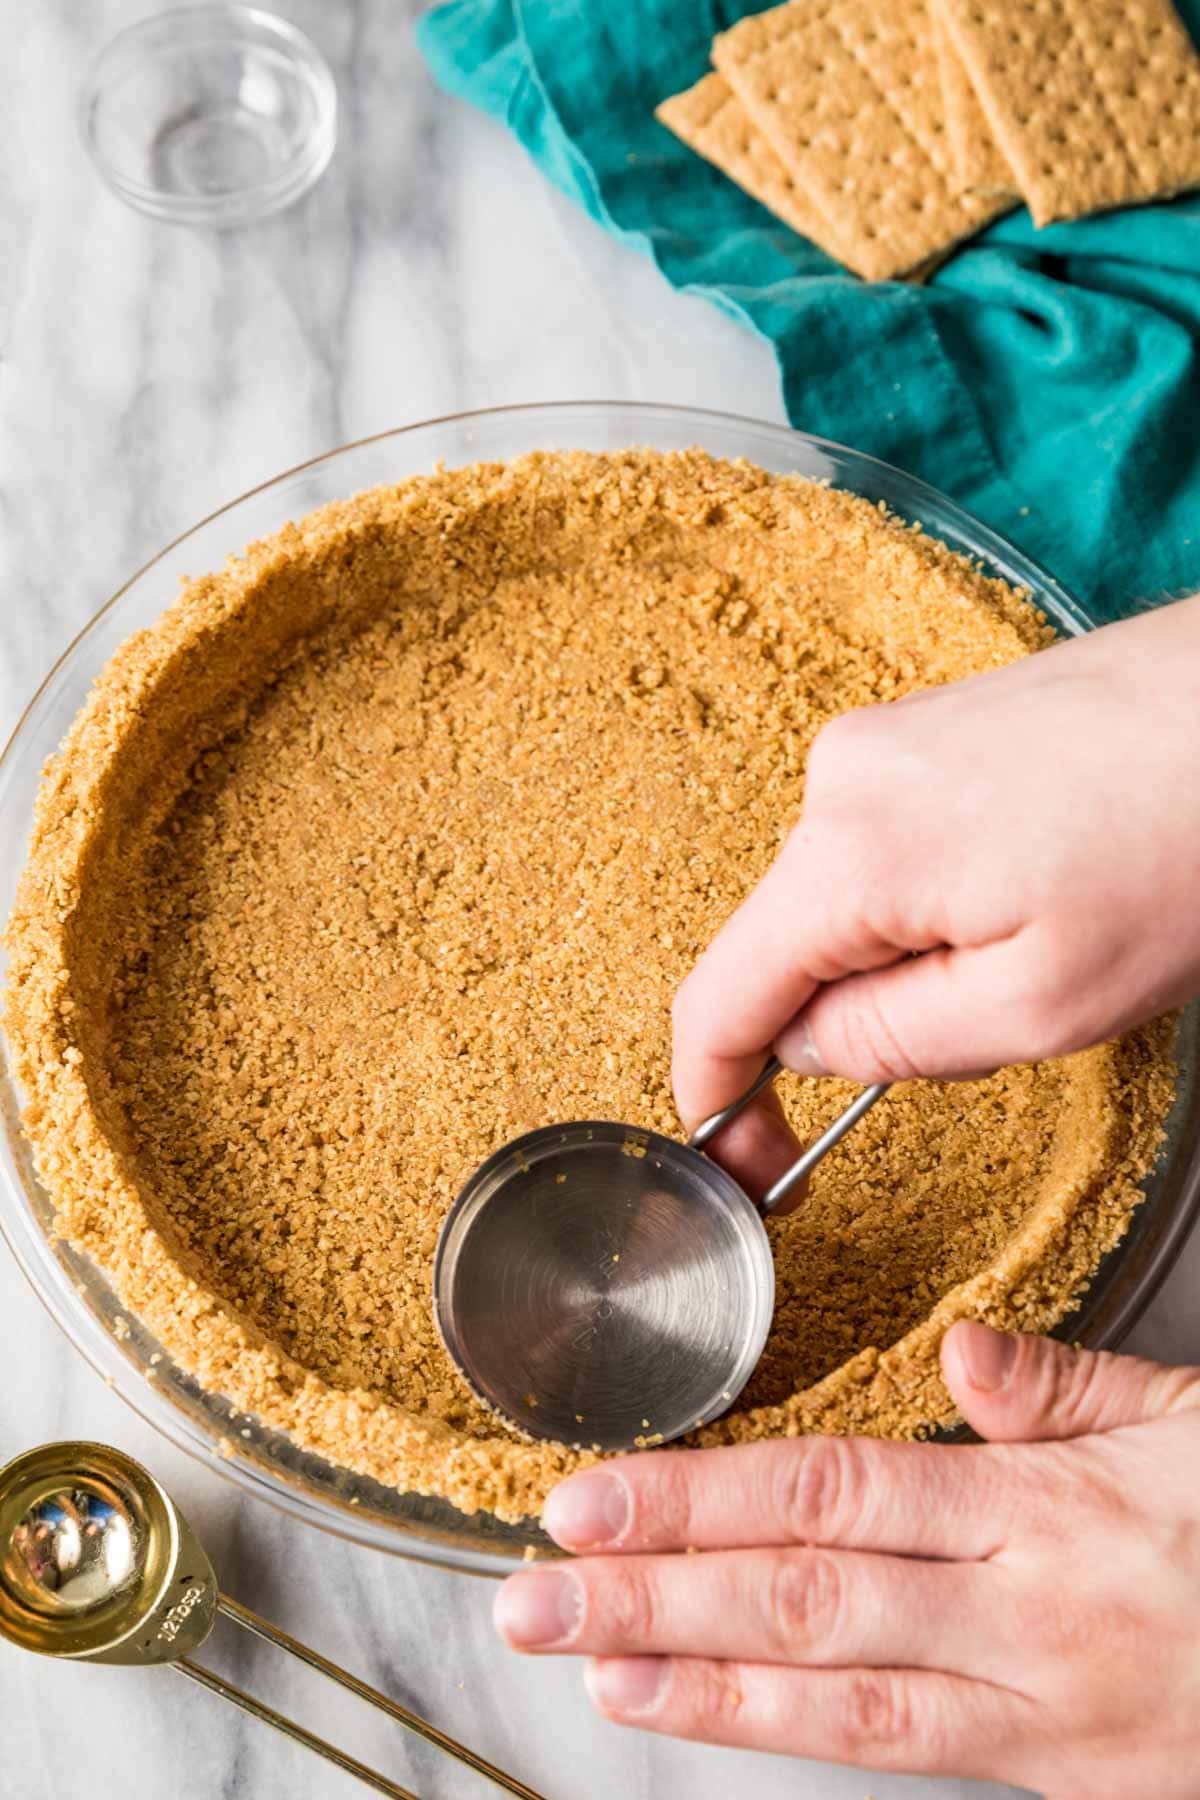 Using a metal measuring cup to tamp graham cracker crumbs into a glass pie plate.